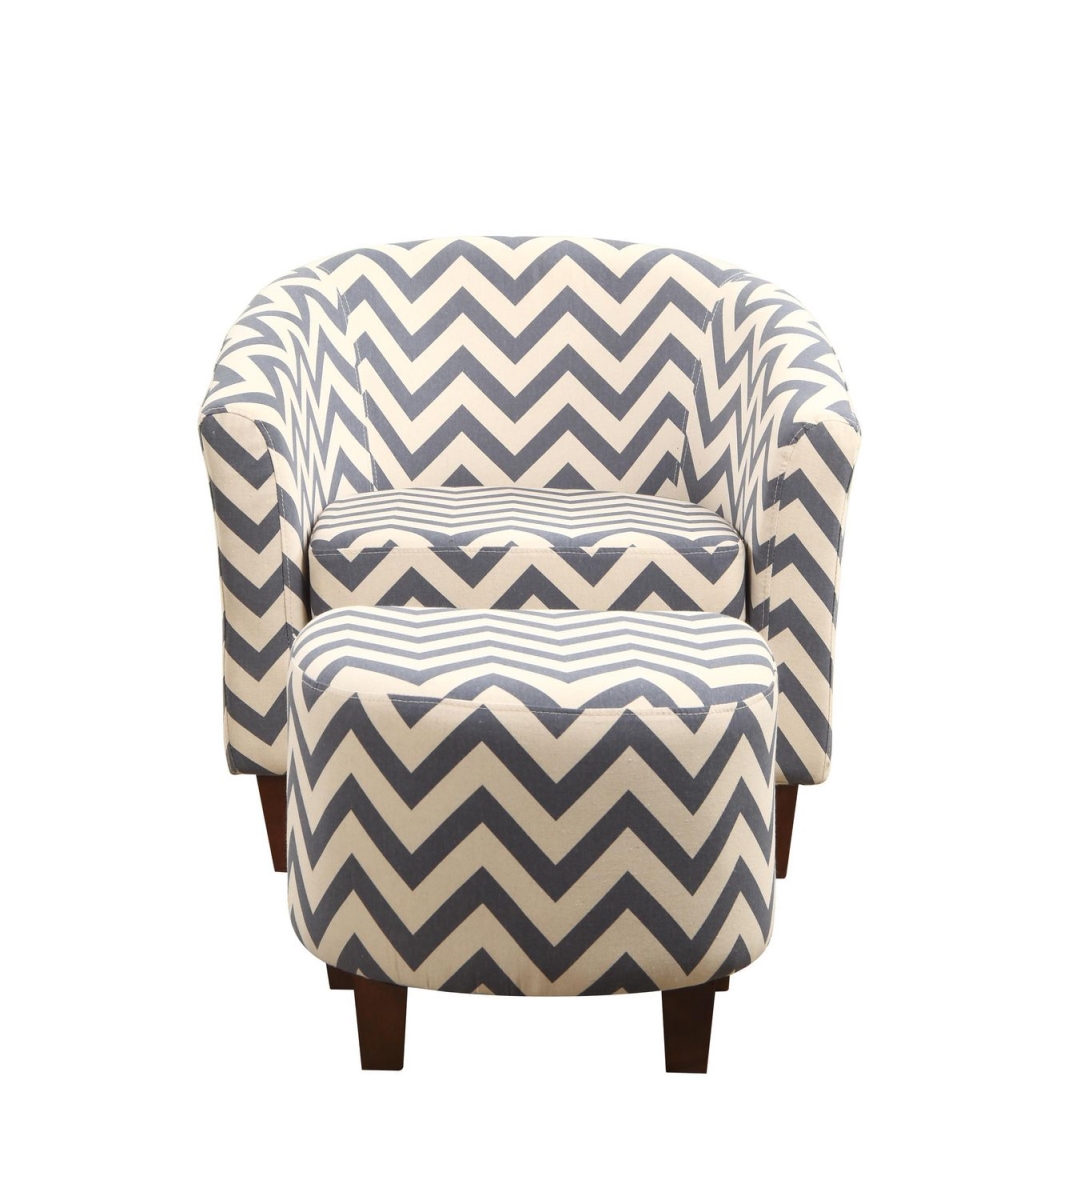 92007-16 Chevron Patterned Tub Chair With Ottoman